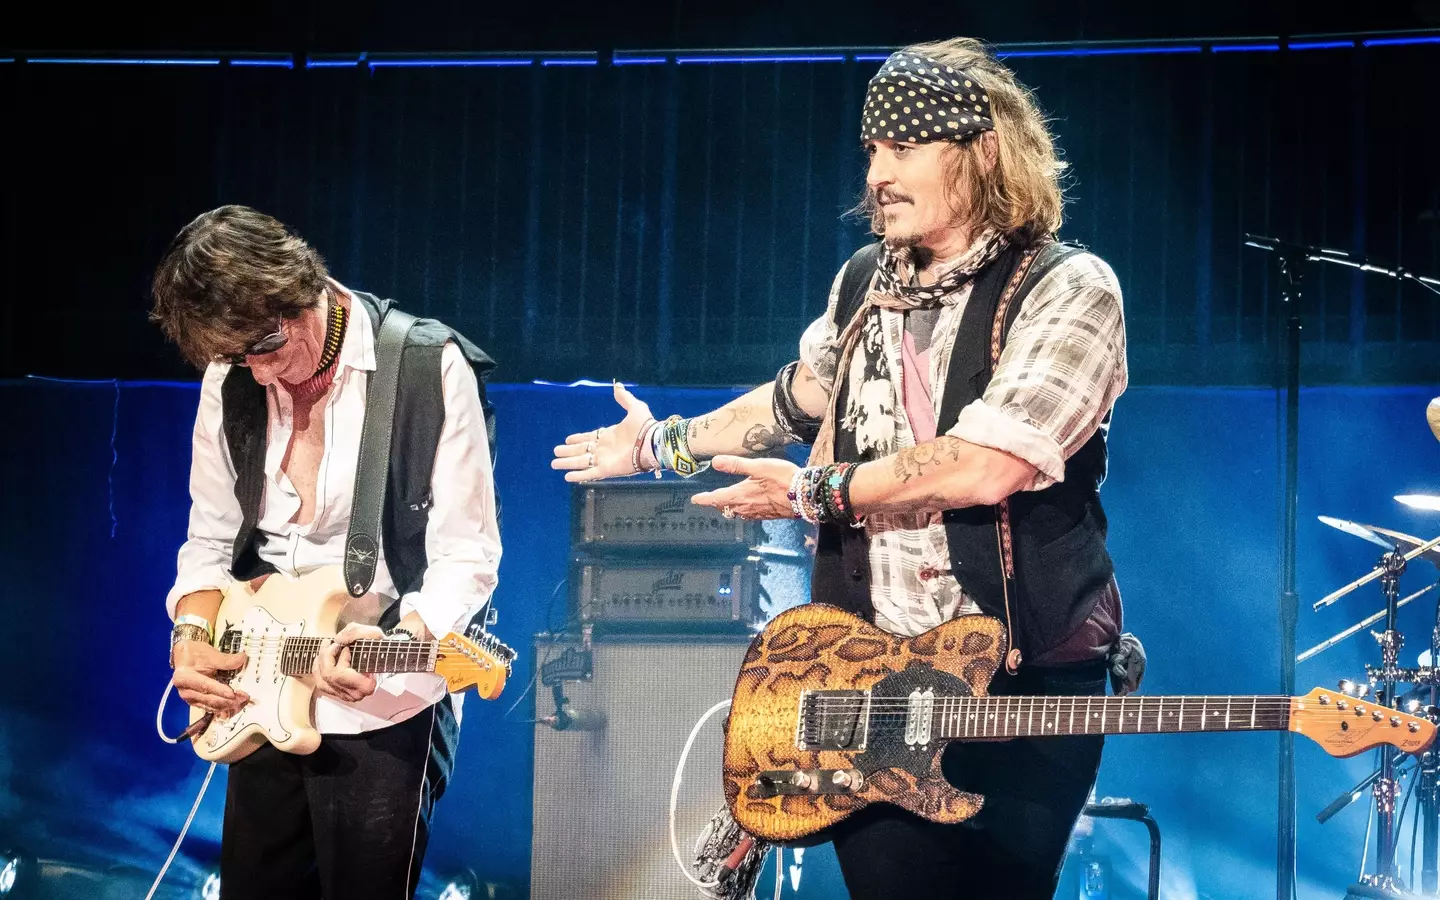 Depp travelled with musician Jeff Beck after the court case ended.